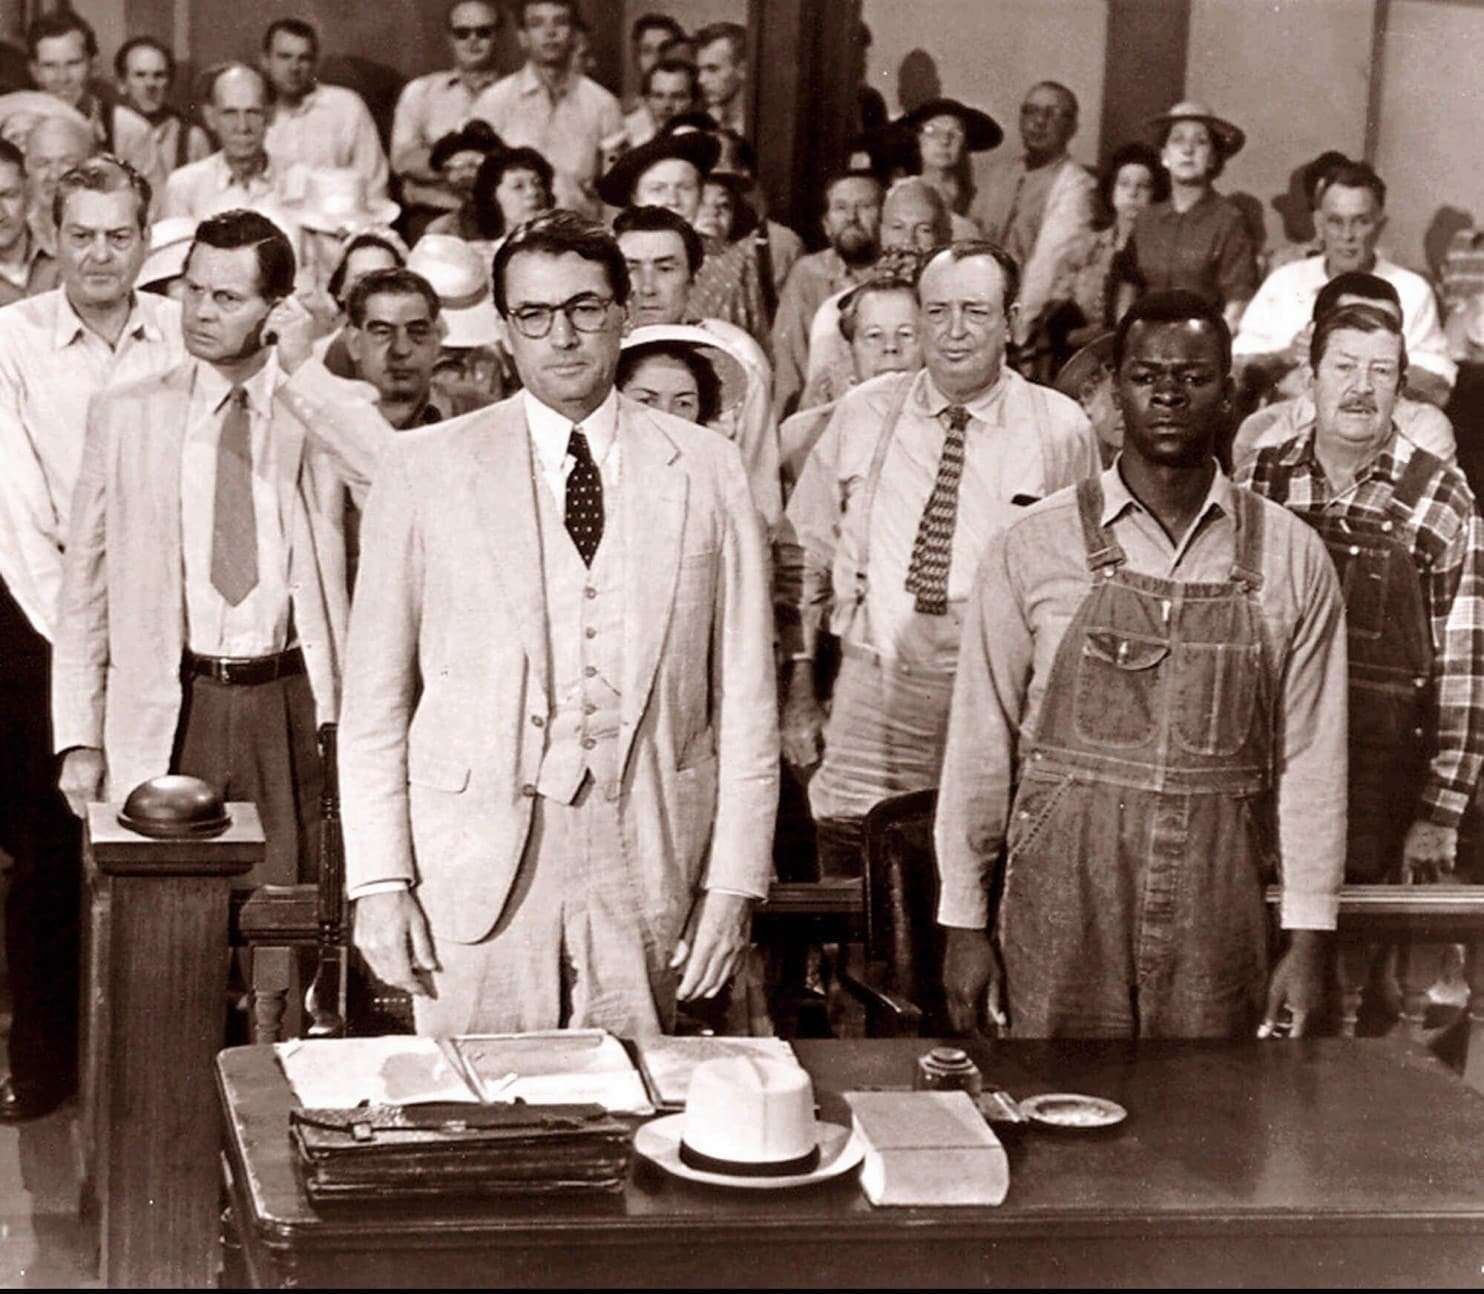 image for The ironic, enduring legacy of banning ‘To Kill a Mockingbird’ for racist language